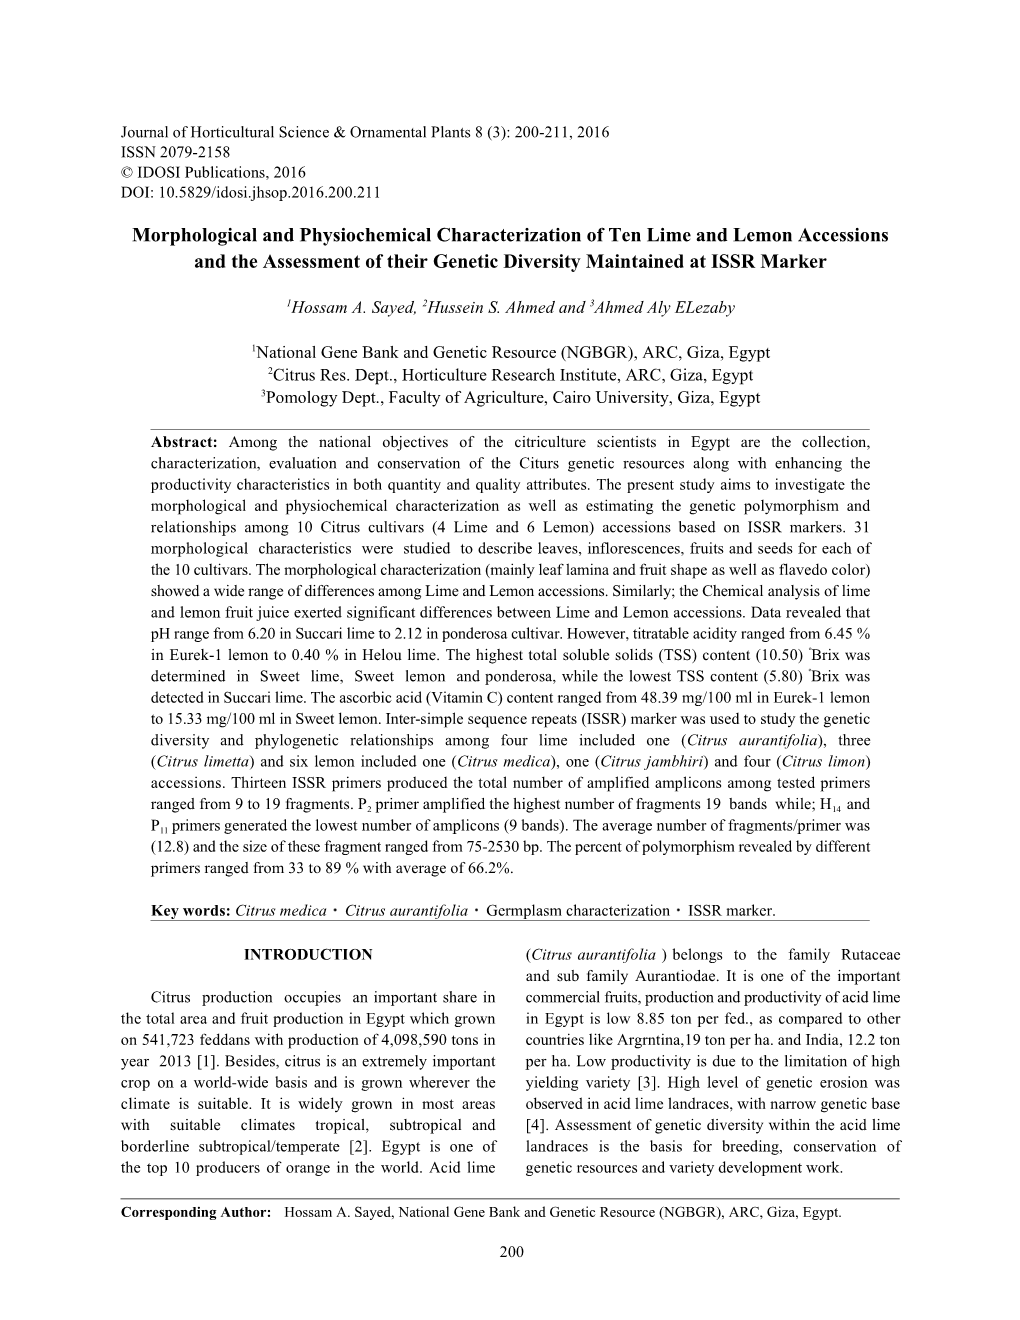 Morphological and Physiochemical Characterization of Ten Lime and Lemon Accessions and the Assessment of Their Genetic Diversity Maintained at ISSR Marker